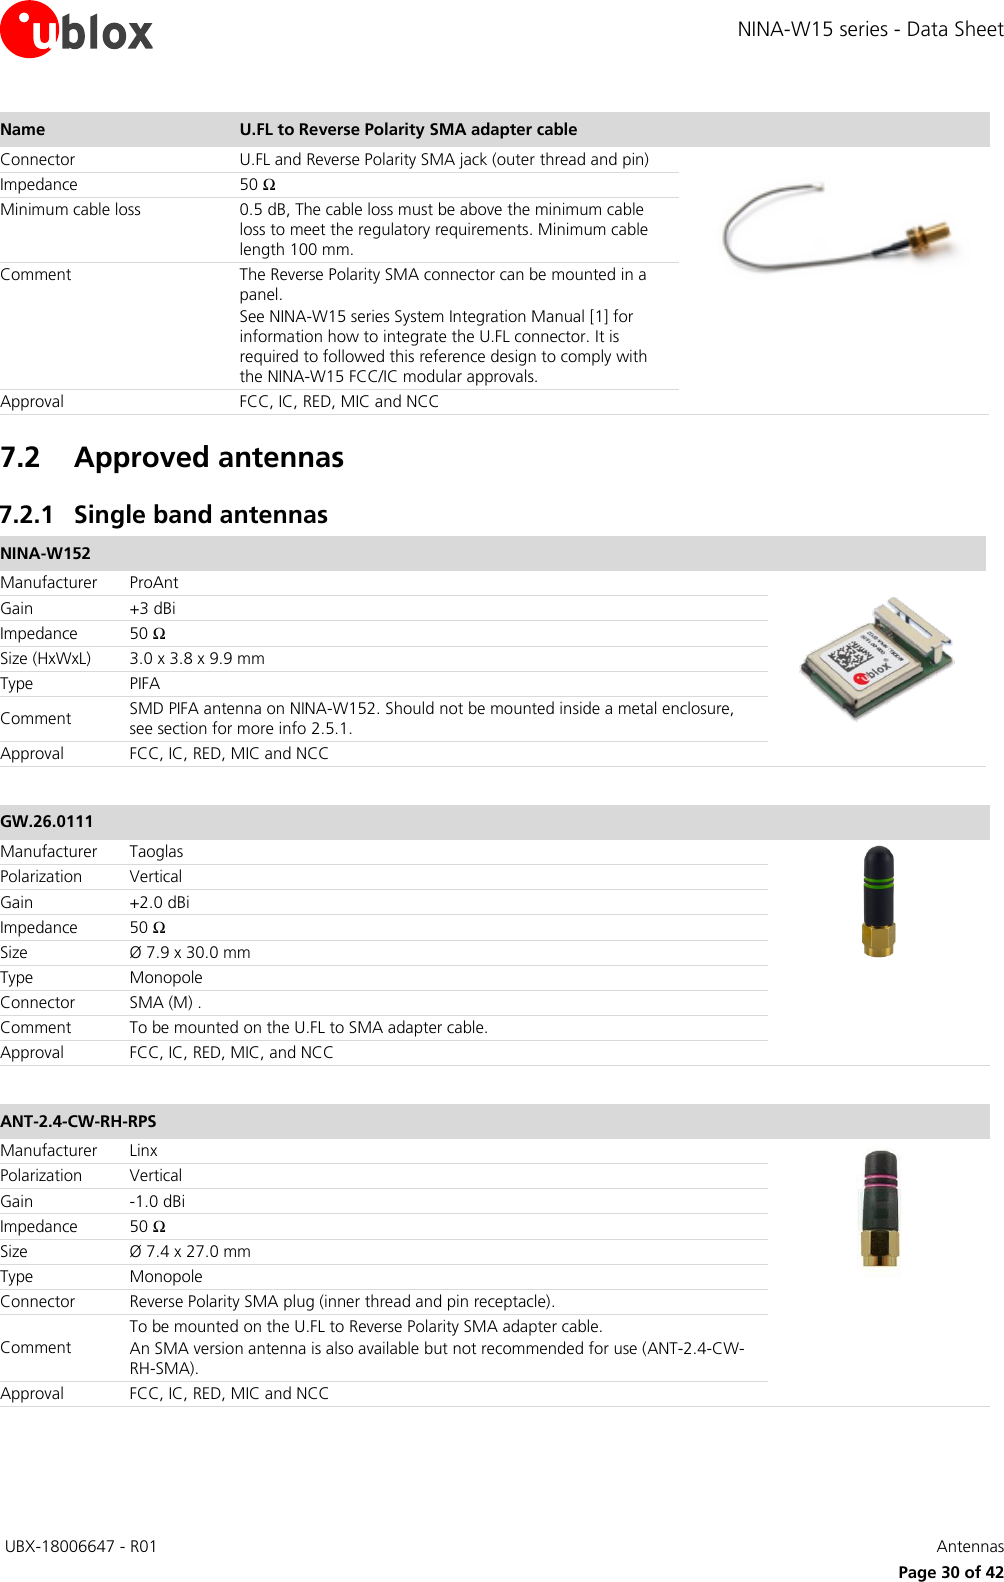 NINA-W15 series - Data Sheet  UBX-18006647 - R01   Antennas     Page 30 of 42 Name U.FL to Reverse Polarity SMA adapter cable  Connector U.FL and Reverse Polarity SMA jack (outer thread and pin)  Impedance 50 Ω Minimum cable loss 0.5 dB, The cable loss must be above the minimum cable loss to meet the regulatory requirements. Minimum cable length 100 mm. Comment The Reverse Polarity SMA connector can be mounted in a panel.  See NINA-W15 series System Integration Manual [1] for  information how to integrate the U.FL connector. It is required to followed this reference design to comply with the NINA-W15 FCC/IC modular approvals. Approval FCC, IC, RED, MIC and NCC 7.2 Approved antennas 7.2.1 Single band antennas NINA-W152  Manufacturer ProAnt   Gain +3 dBi Impedance 50 Ω Size (HxWxL) 3.0 x 3.8 x 9.9 mm Type PIFA Comment SMD PIFA antenna on NINA-W152. Should not be mounted inside a metal enclosure, see section for more info 2.5.1. Approval FCC, IC, RED, MIC and NCC  GW.26.0111  Manufacturer Taoglas  Polarization Vertical Gain +2.0 dBi Impedance 50 Ω Size Ø 7.9 x 30.0 mm Type Monopole Connector SMA (M) .  Comment To be mounted on the U.FL to SMA adapter cable. Approval FCC, IC, RED, MIC, and NCC  ANT-2.4-CW-RH-RPS  Manufacturer Linx  Polarization Vertical Gain -1.0 dBi Impedance 50 Ω Size Ø 7.4 x 27.0 mm Type Monopole Connector Reverse Polarity SMA plug (inner thread and pin receptacle).  Comment To be mounted on the U.FL to Reverse Polarity SMA adapter cable. An SMA version antenna is also available but not recommended for use (ANT-2.4-CW-RH-SMA). Approval FCC, IC, RED, MIC and NCC   